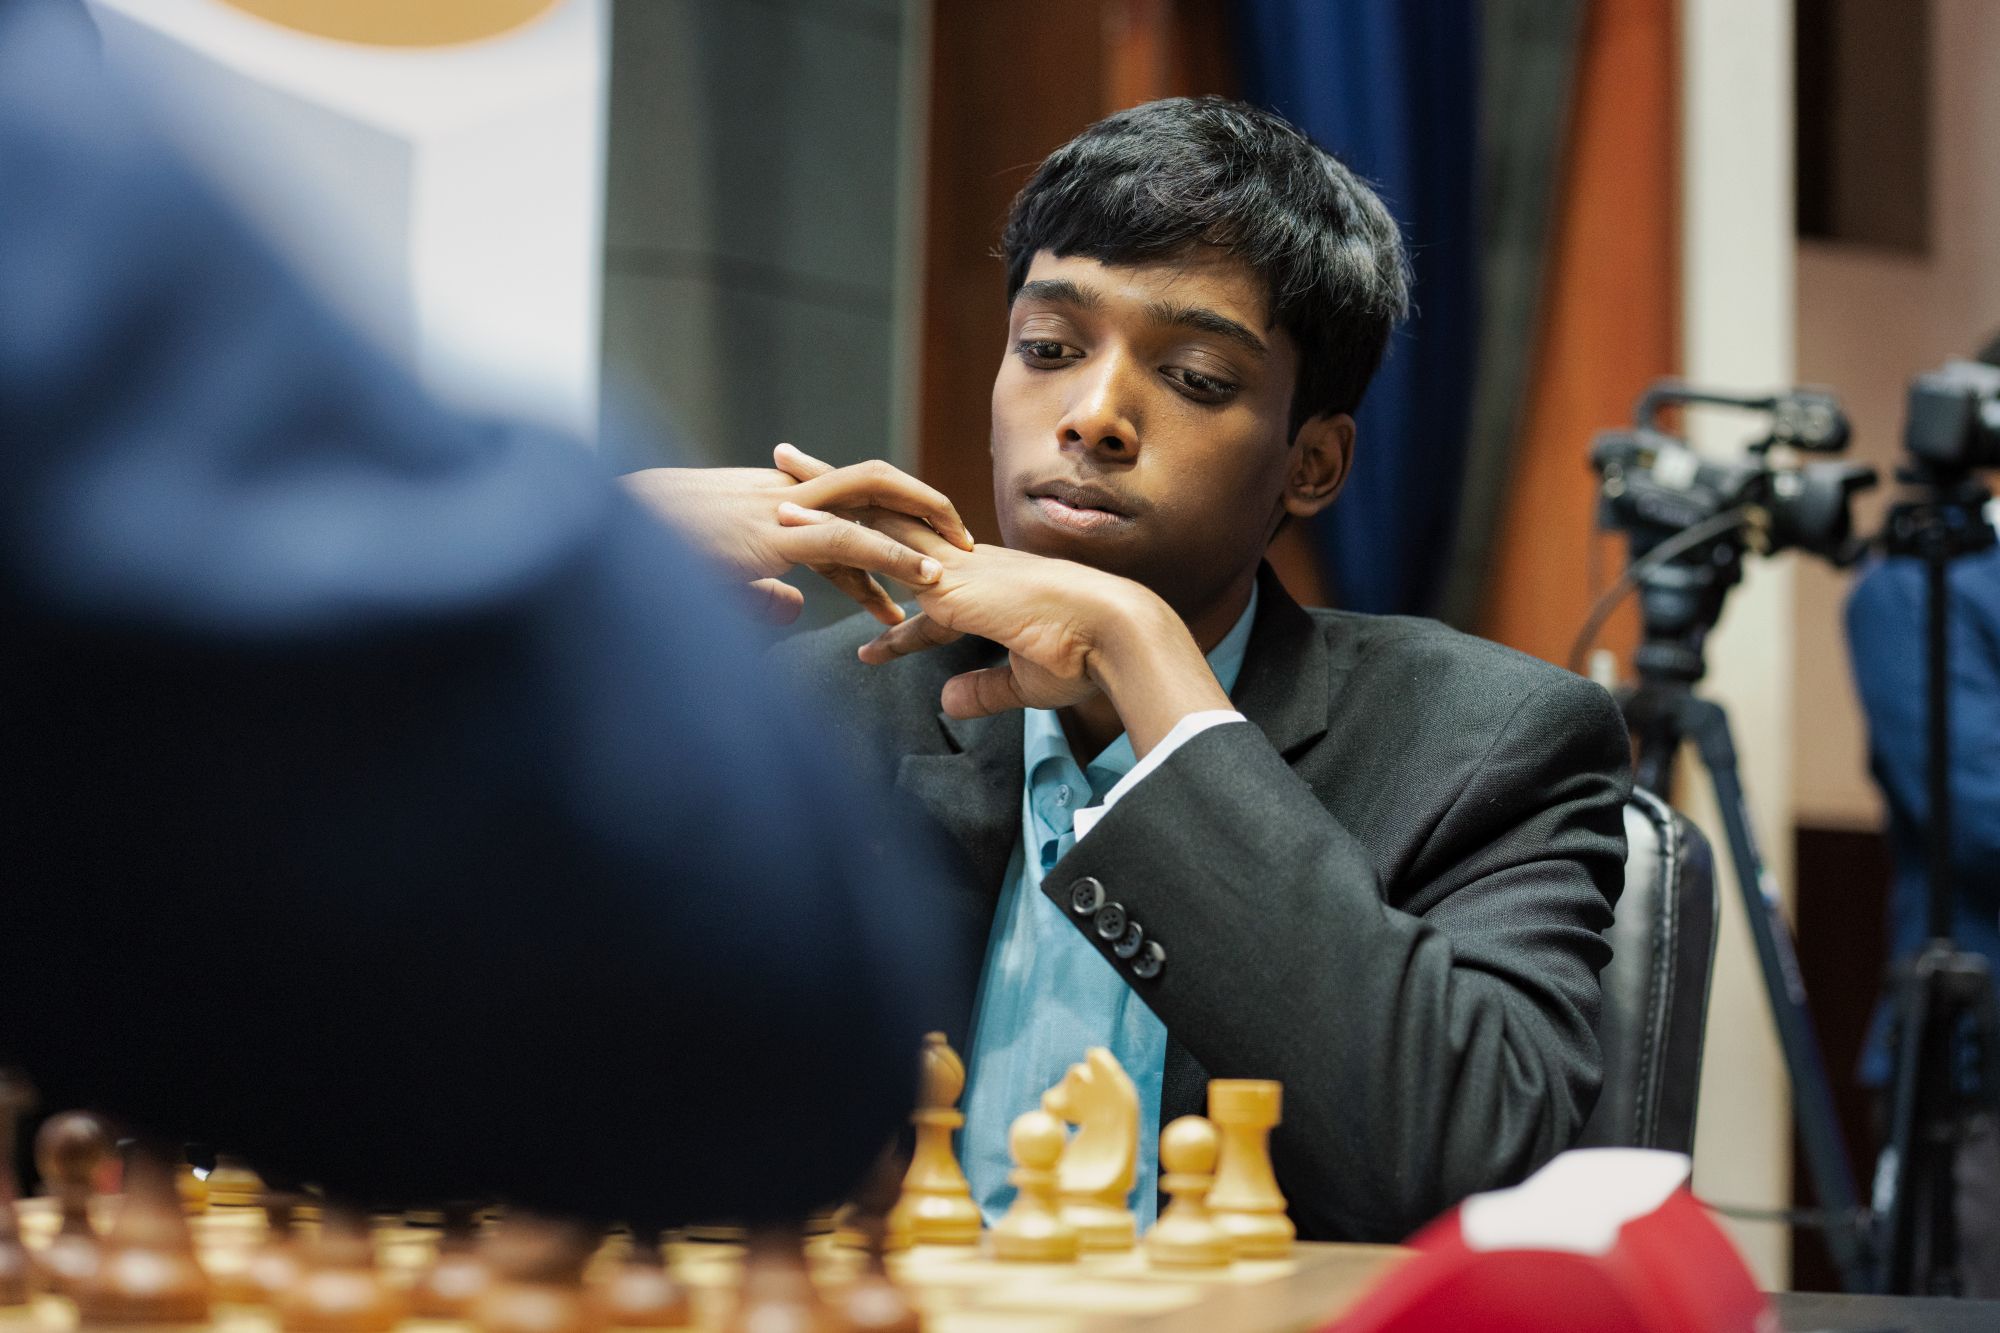 The youngest Grandmaster in history to cross the 2750 ELO rating -  Dommaraju Gukesh returns to Tata Steel Chess India 2023! Mark the dates…